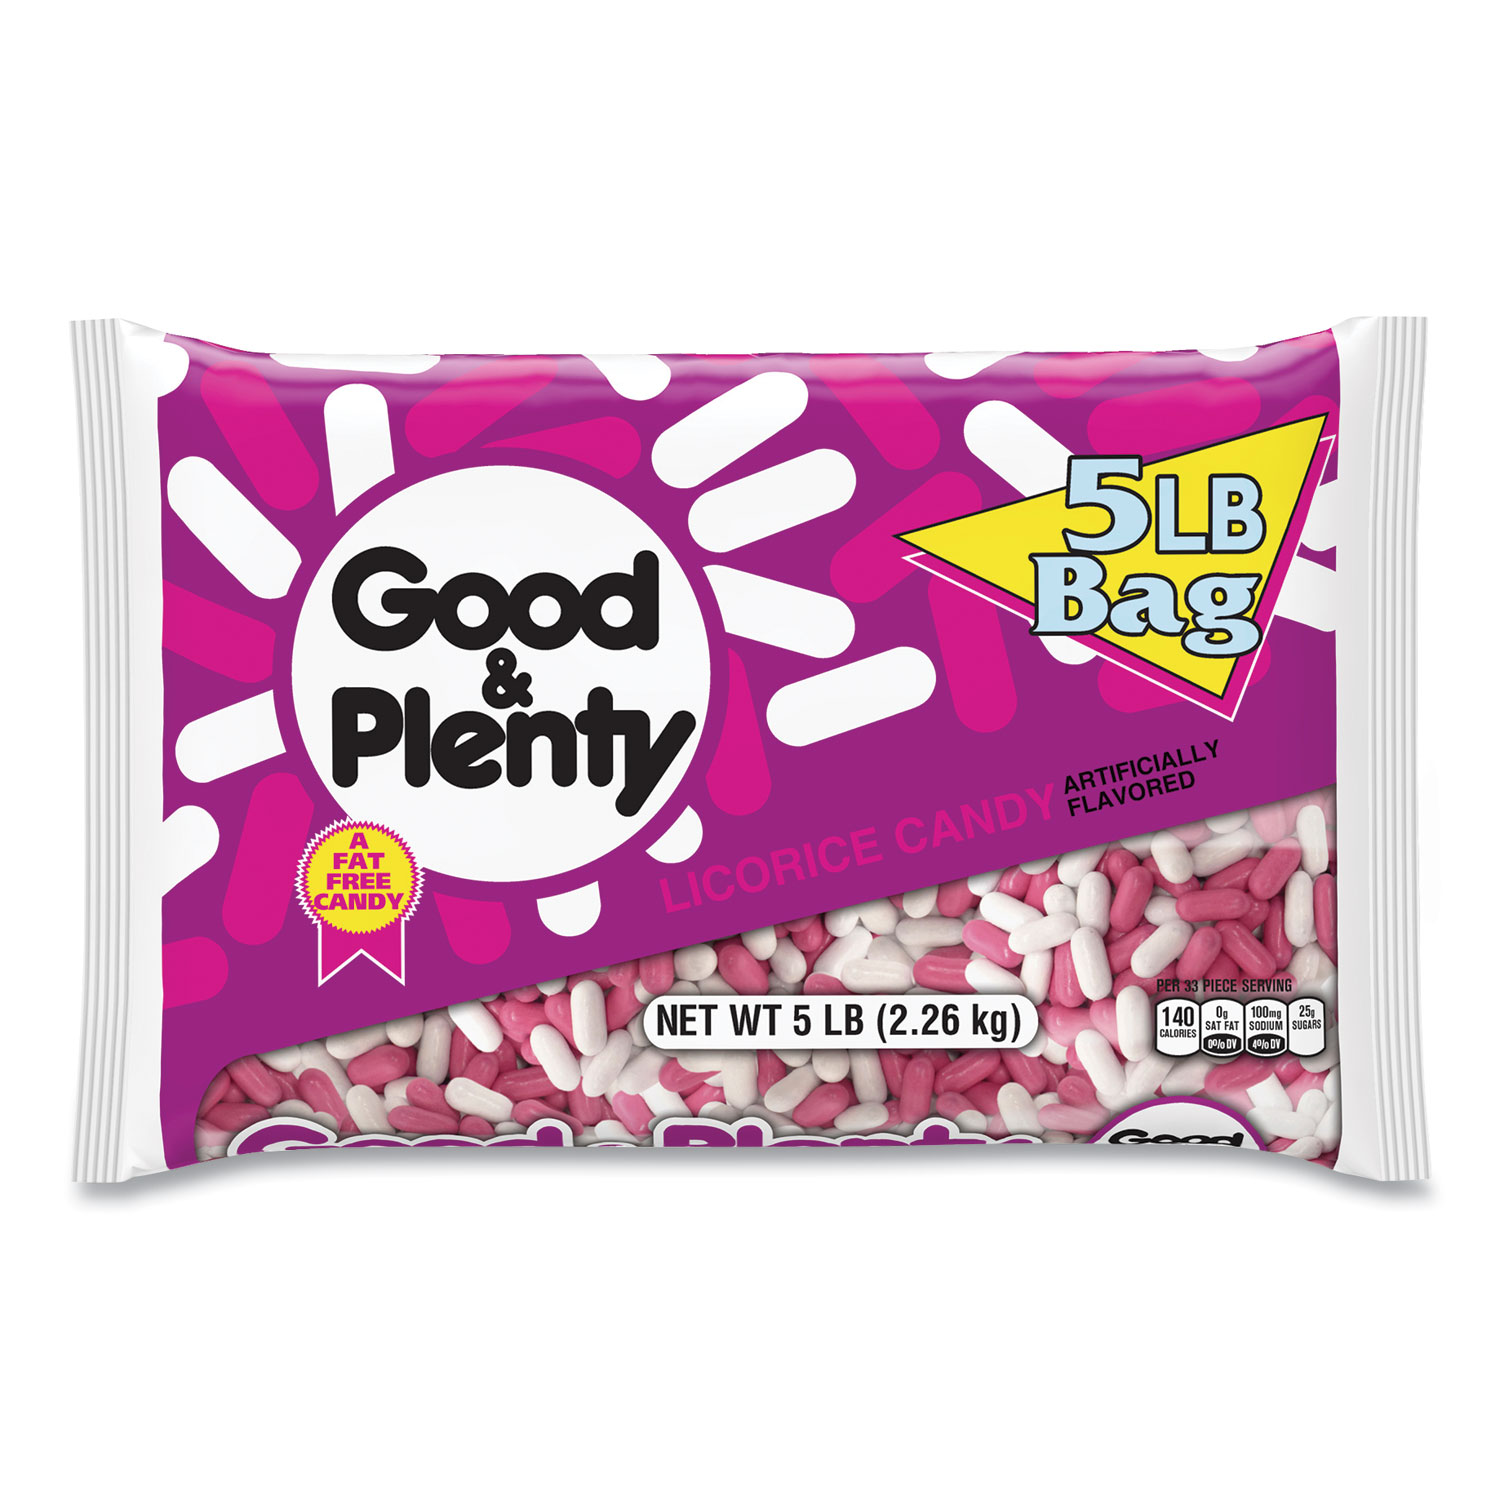  Good & Plenty 8820 Licorice Candy, 5 lb Bag, Free Delivery in 1-4 Business Days (GRR24600004) 